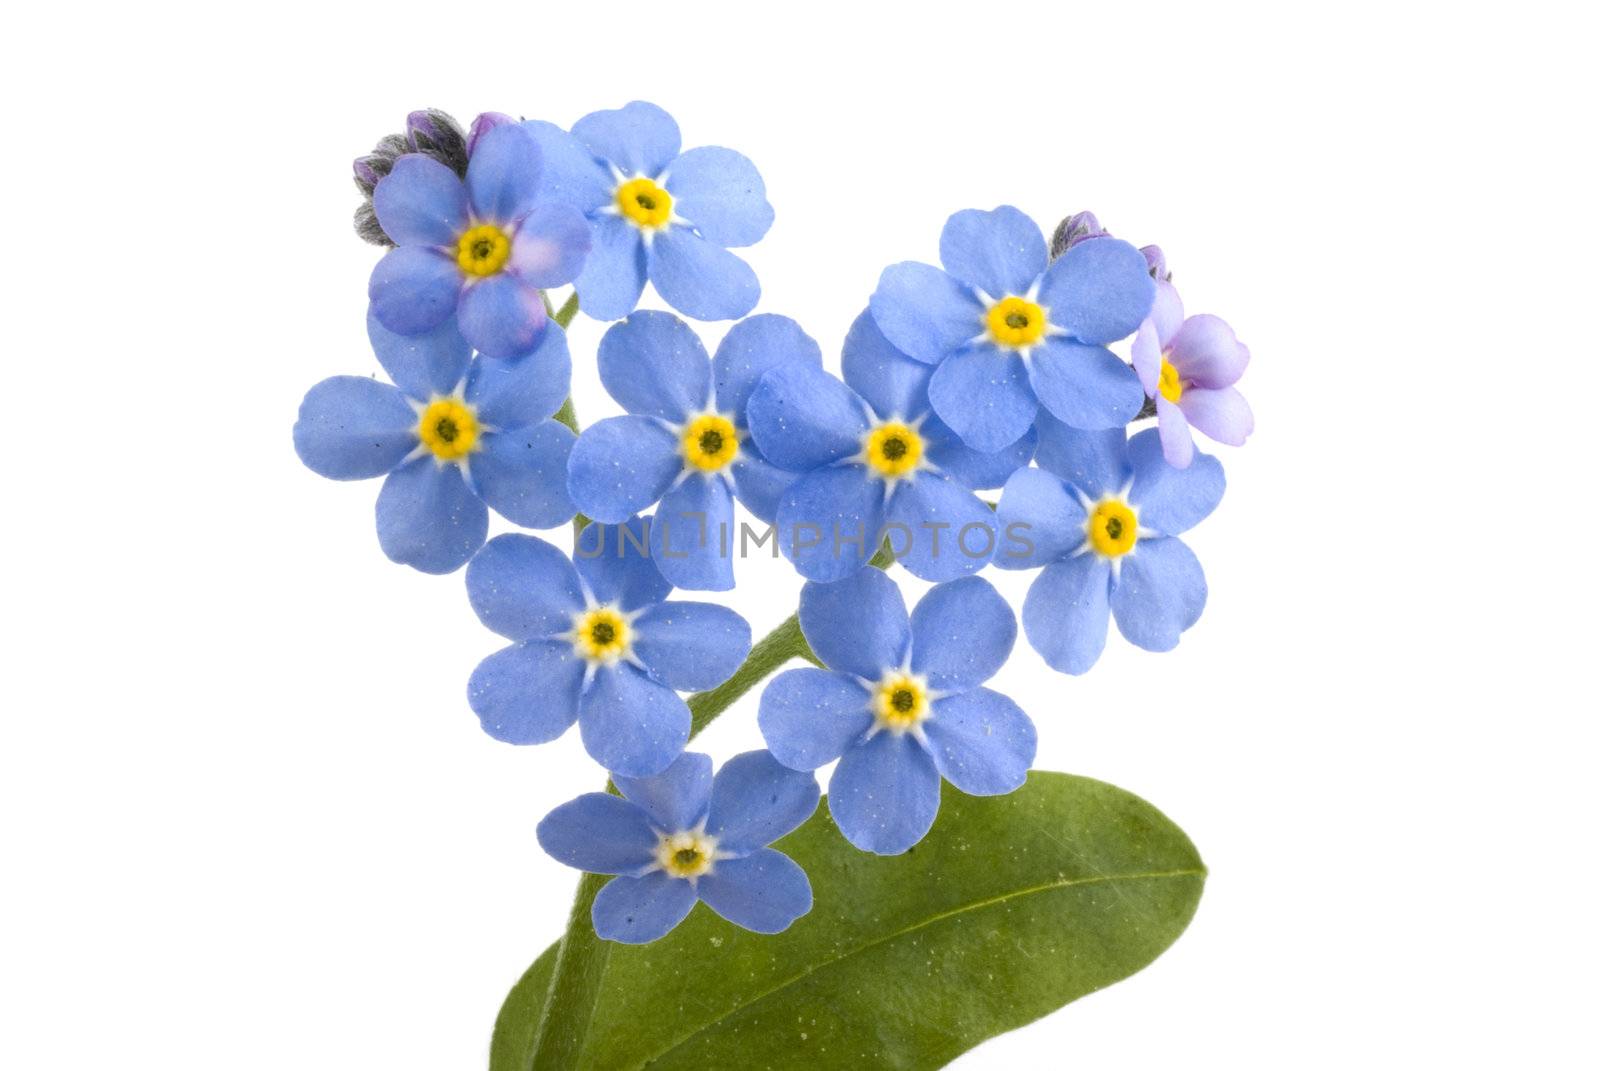 Forget me not, sweet little flowers on a white background.